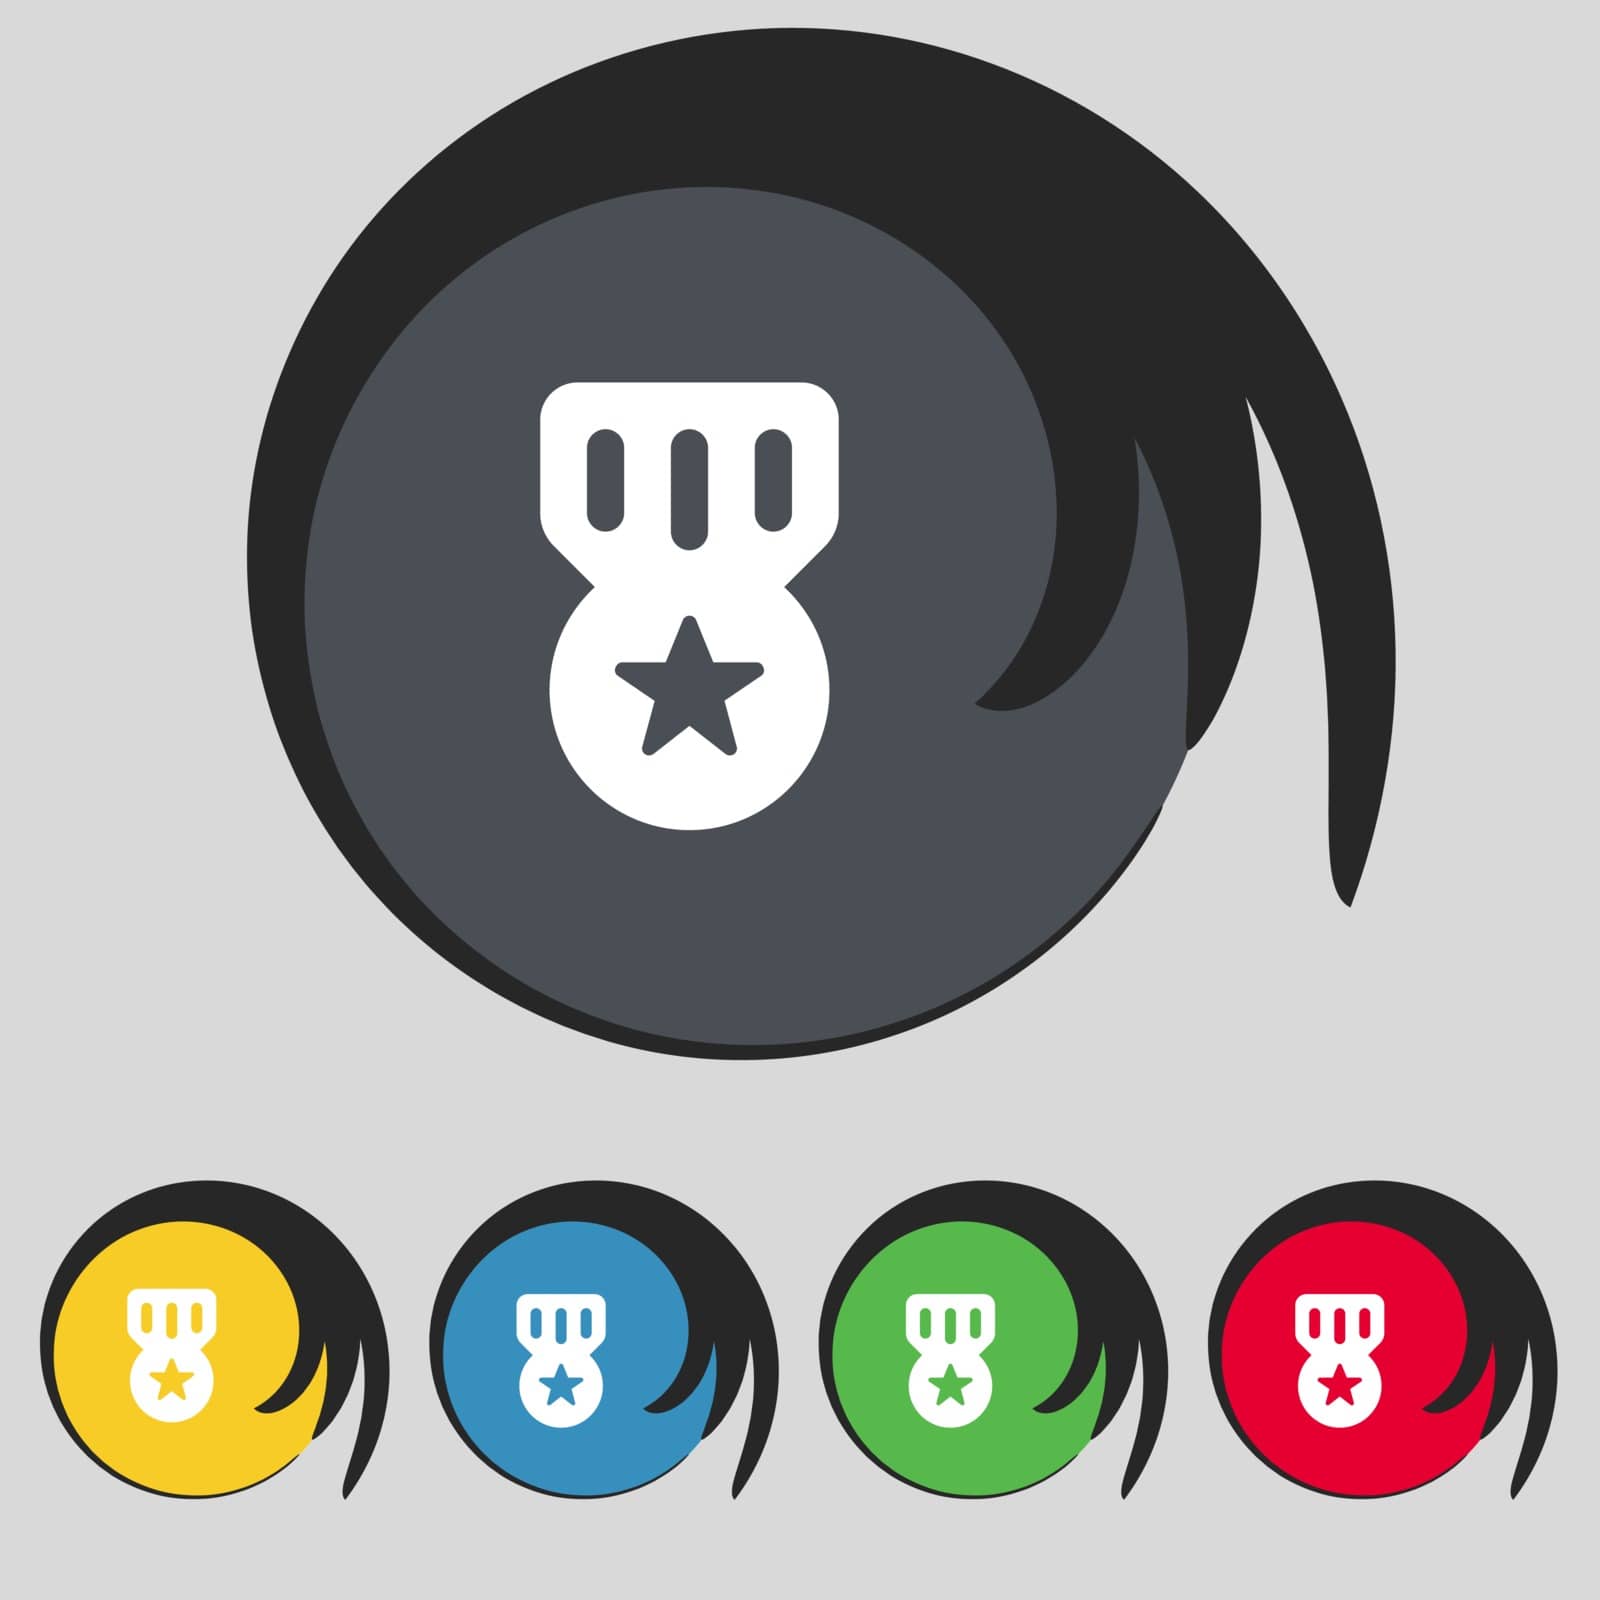 Award, Medal of Honor icon sign. Symbol on five colored buttons. Vector illustration